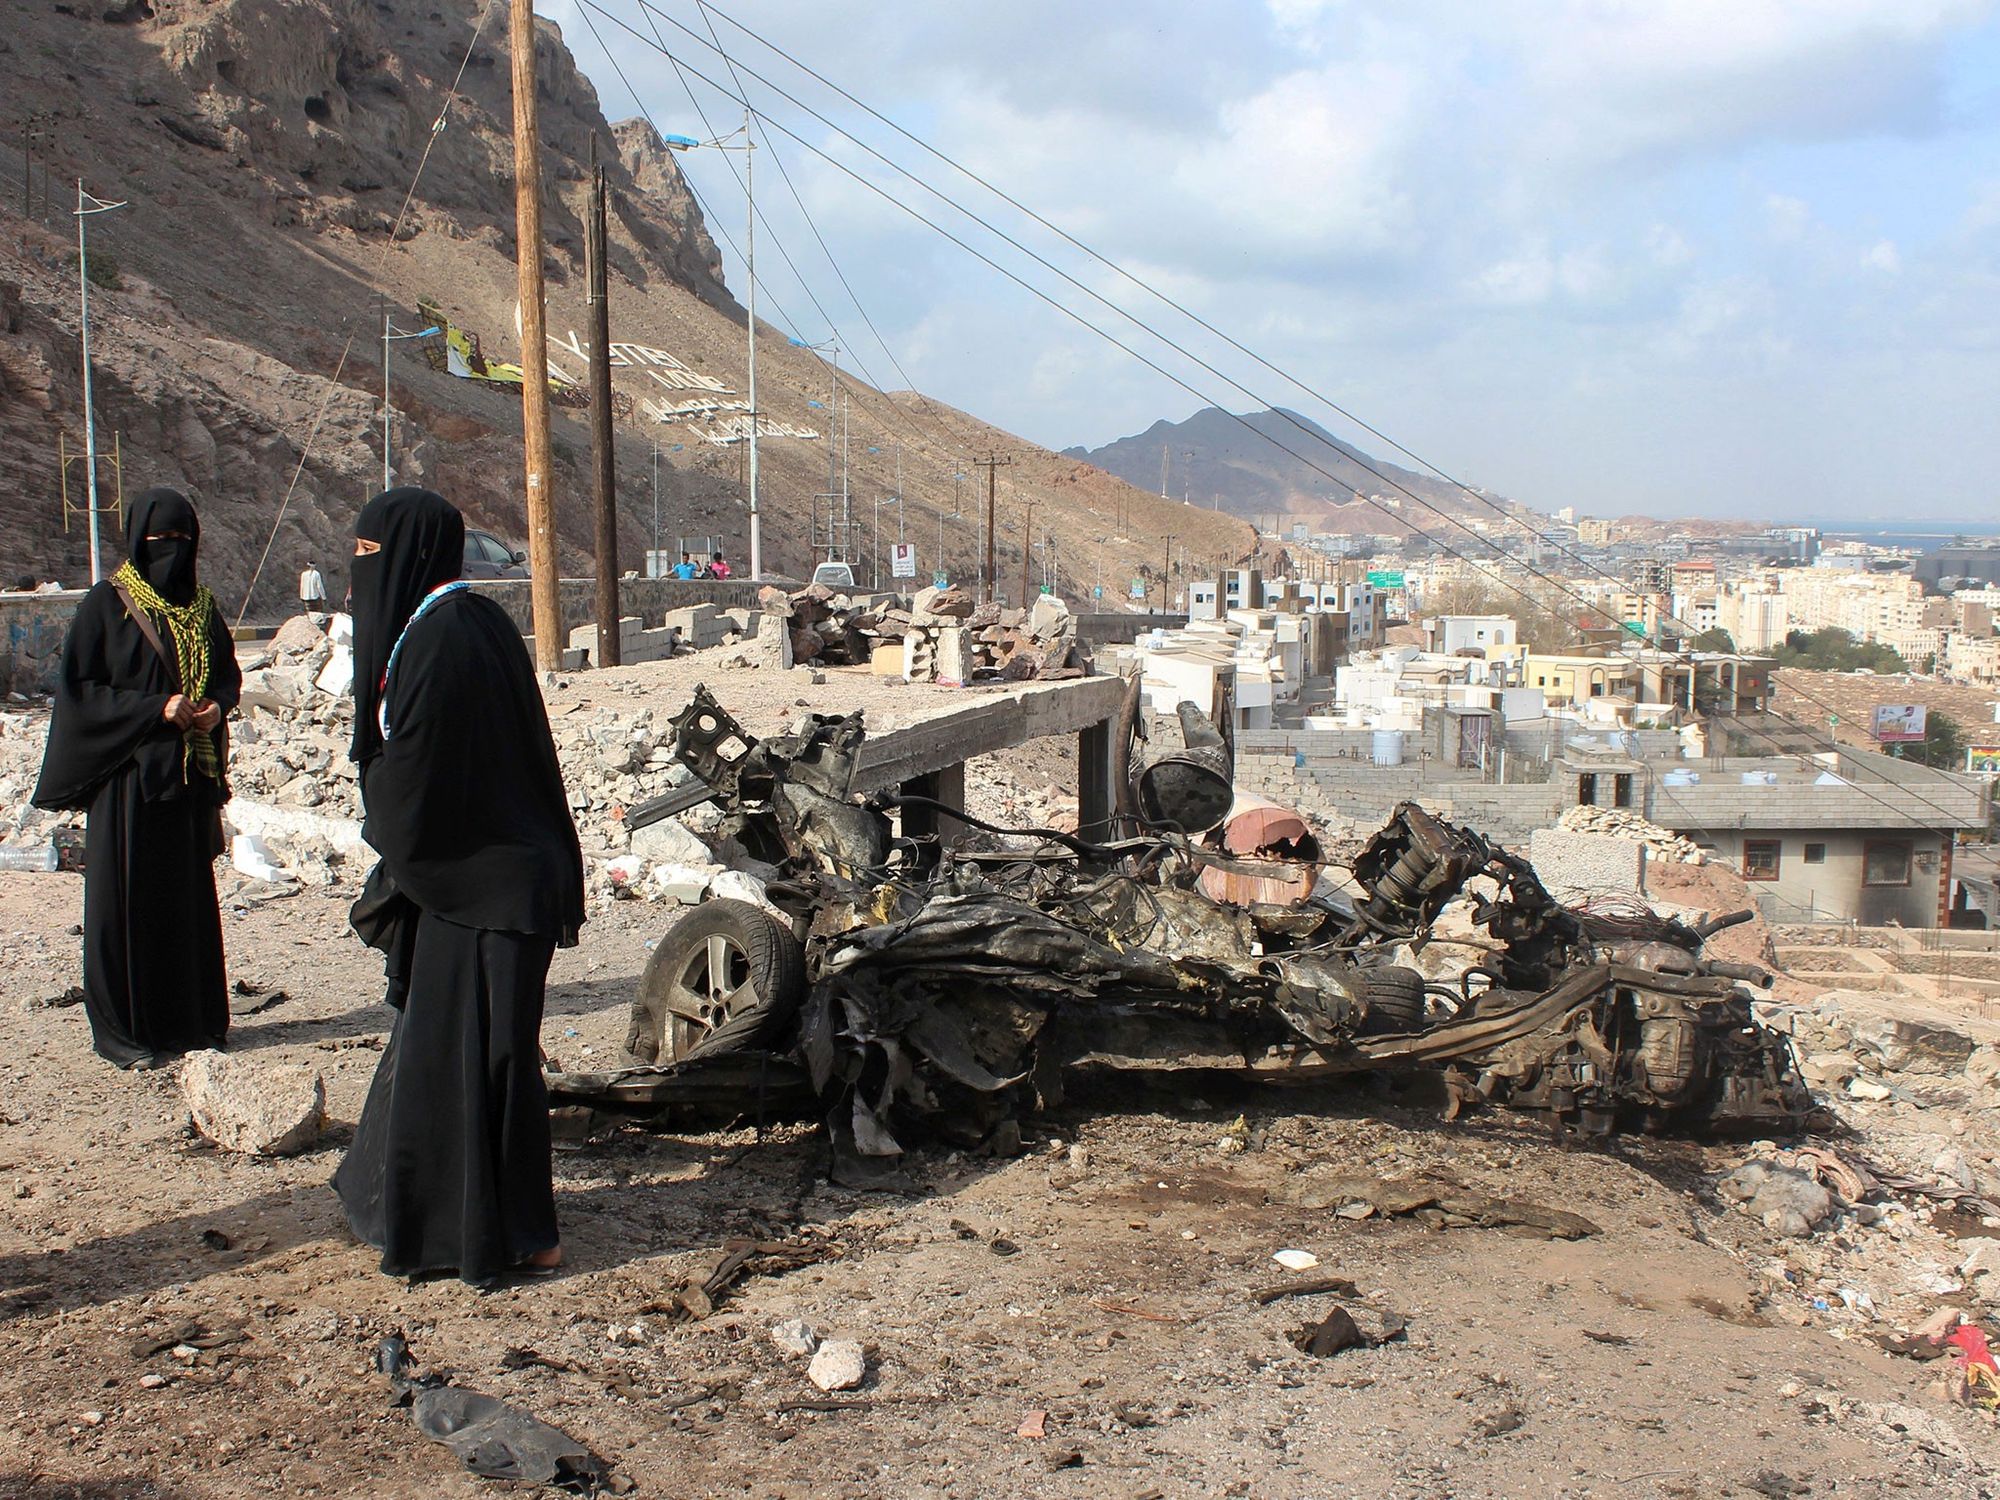 From Saudi Arabia to Yemen: generous donations and continued destruction